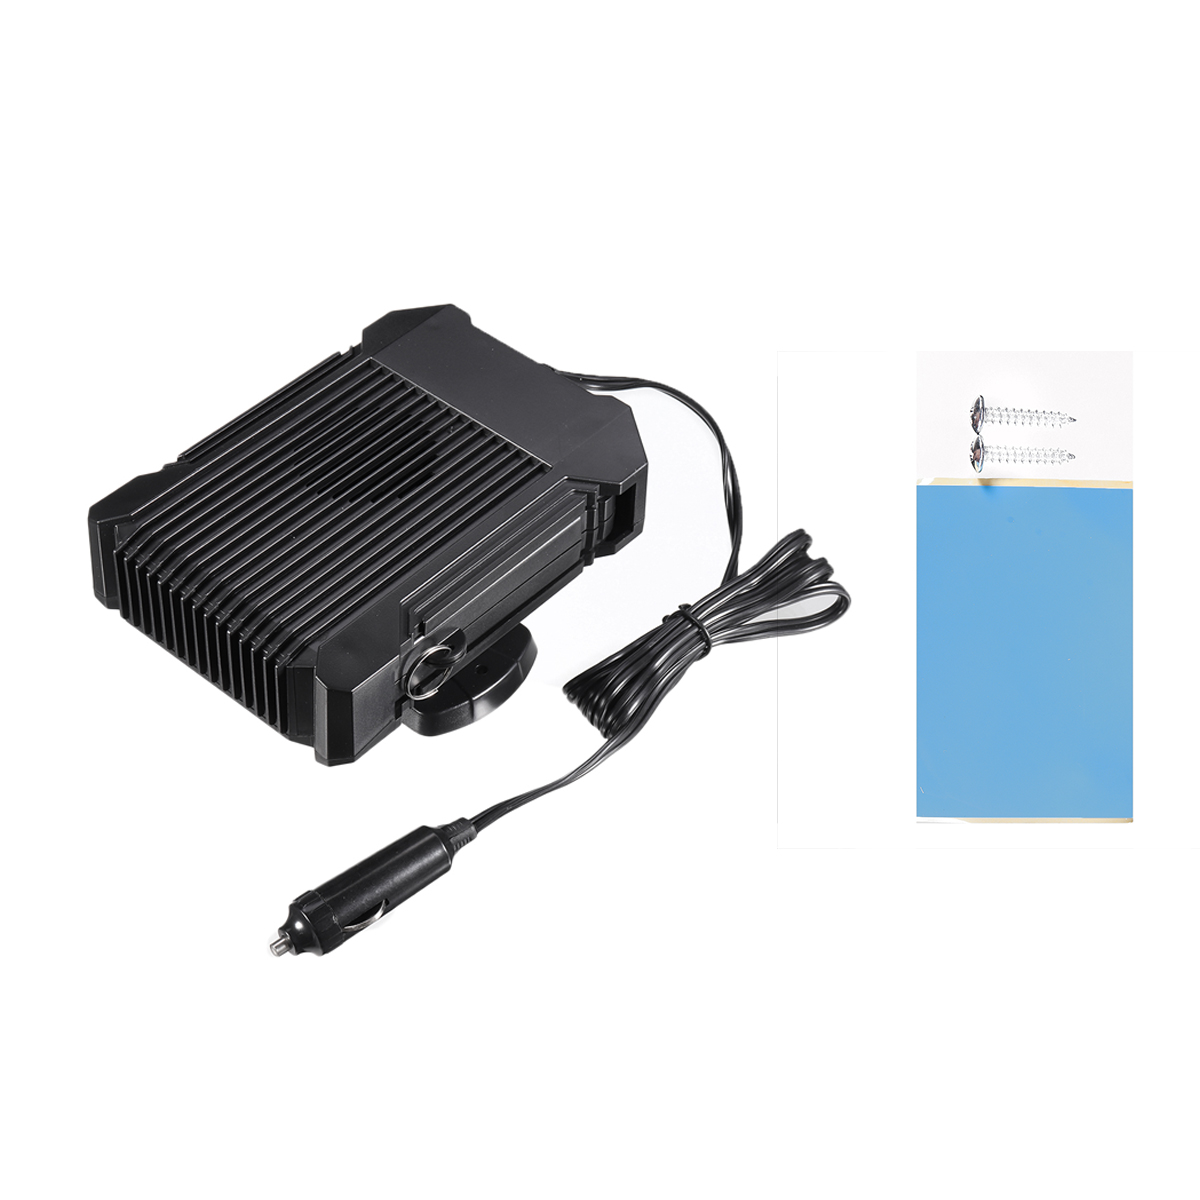 Find 2 in 1 Car Truck Heater 12V Heating Cool Fan Dryer Windscreen Demister Defroster for Sale on Gipsybee.com with cryptocurrencies